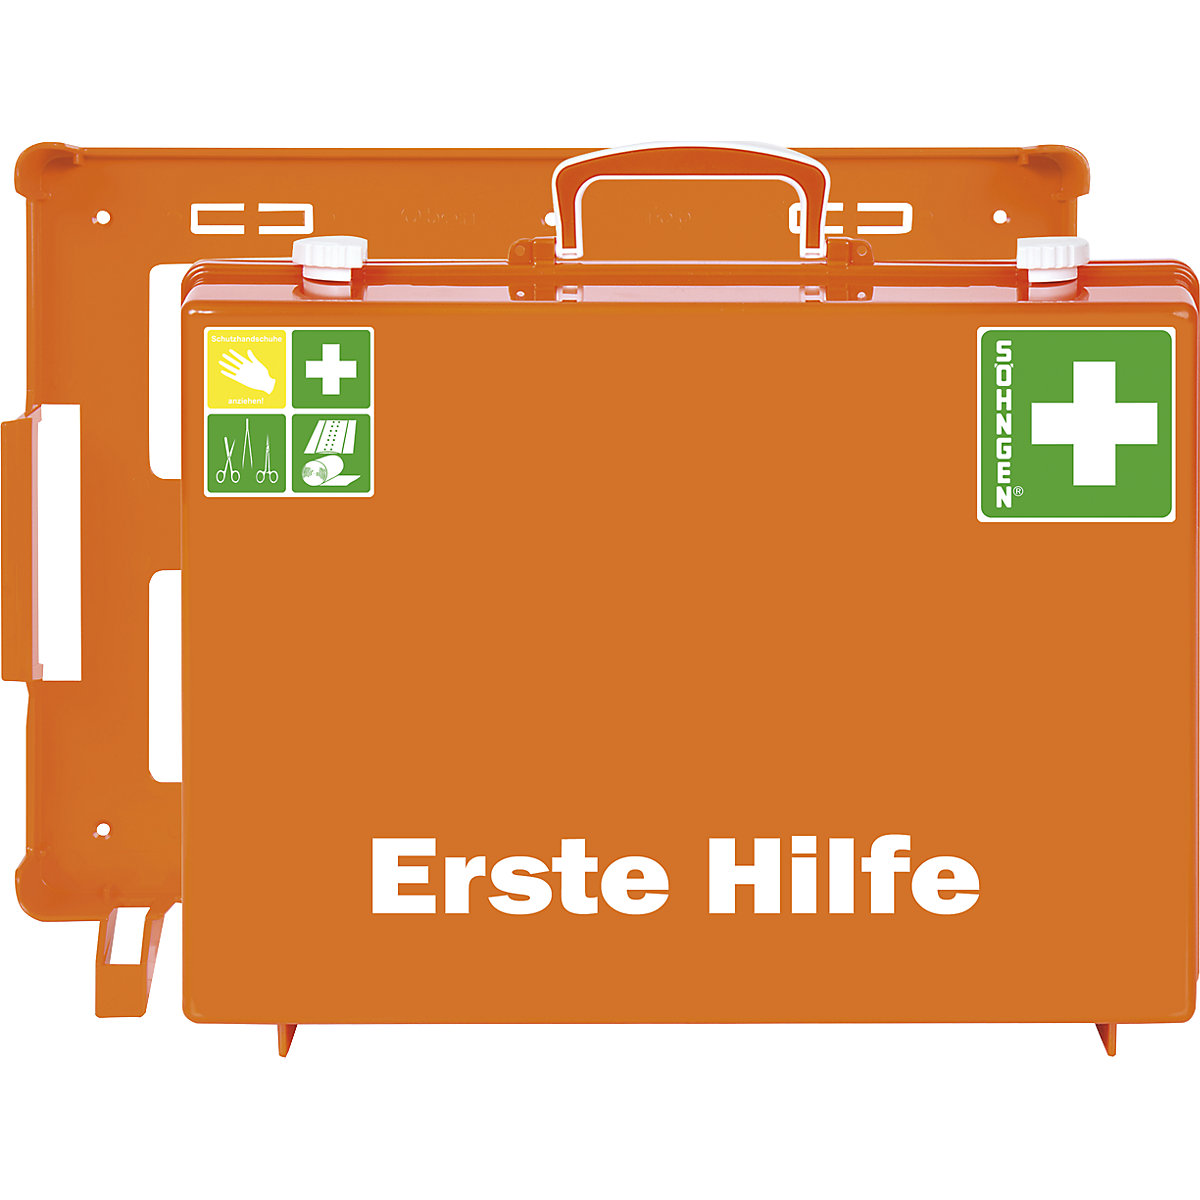 SÖHNGEN – First aid case, DIN 13169 compliant (Product illustration 4)